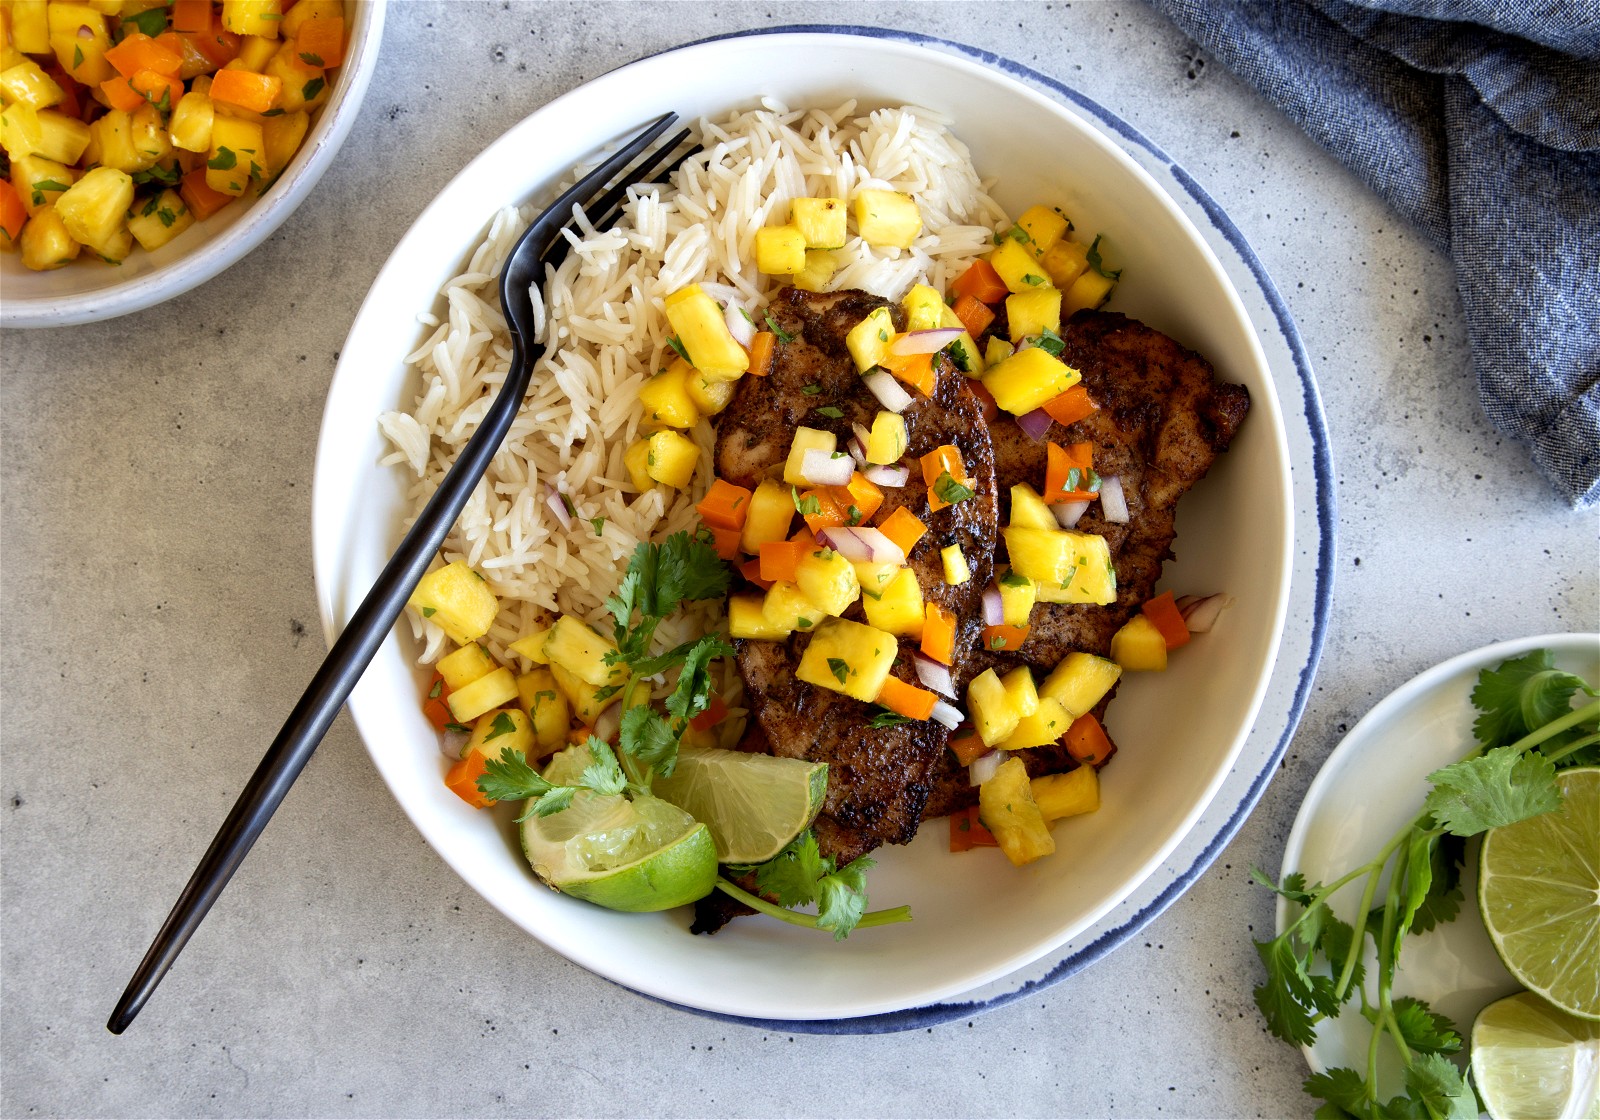 Image of Grilled Jerk Chicken with Pineapple Salsa